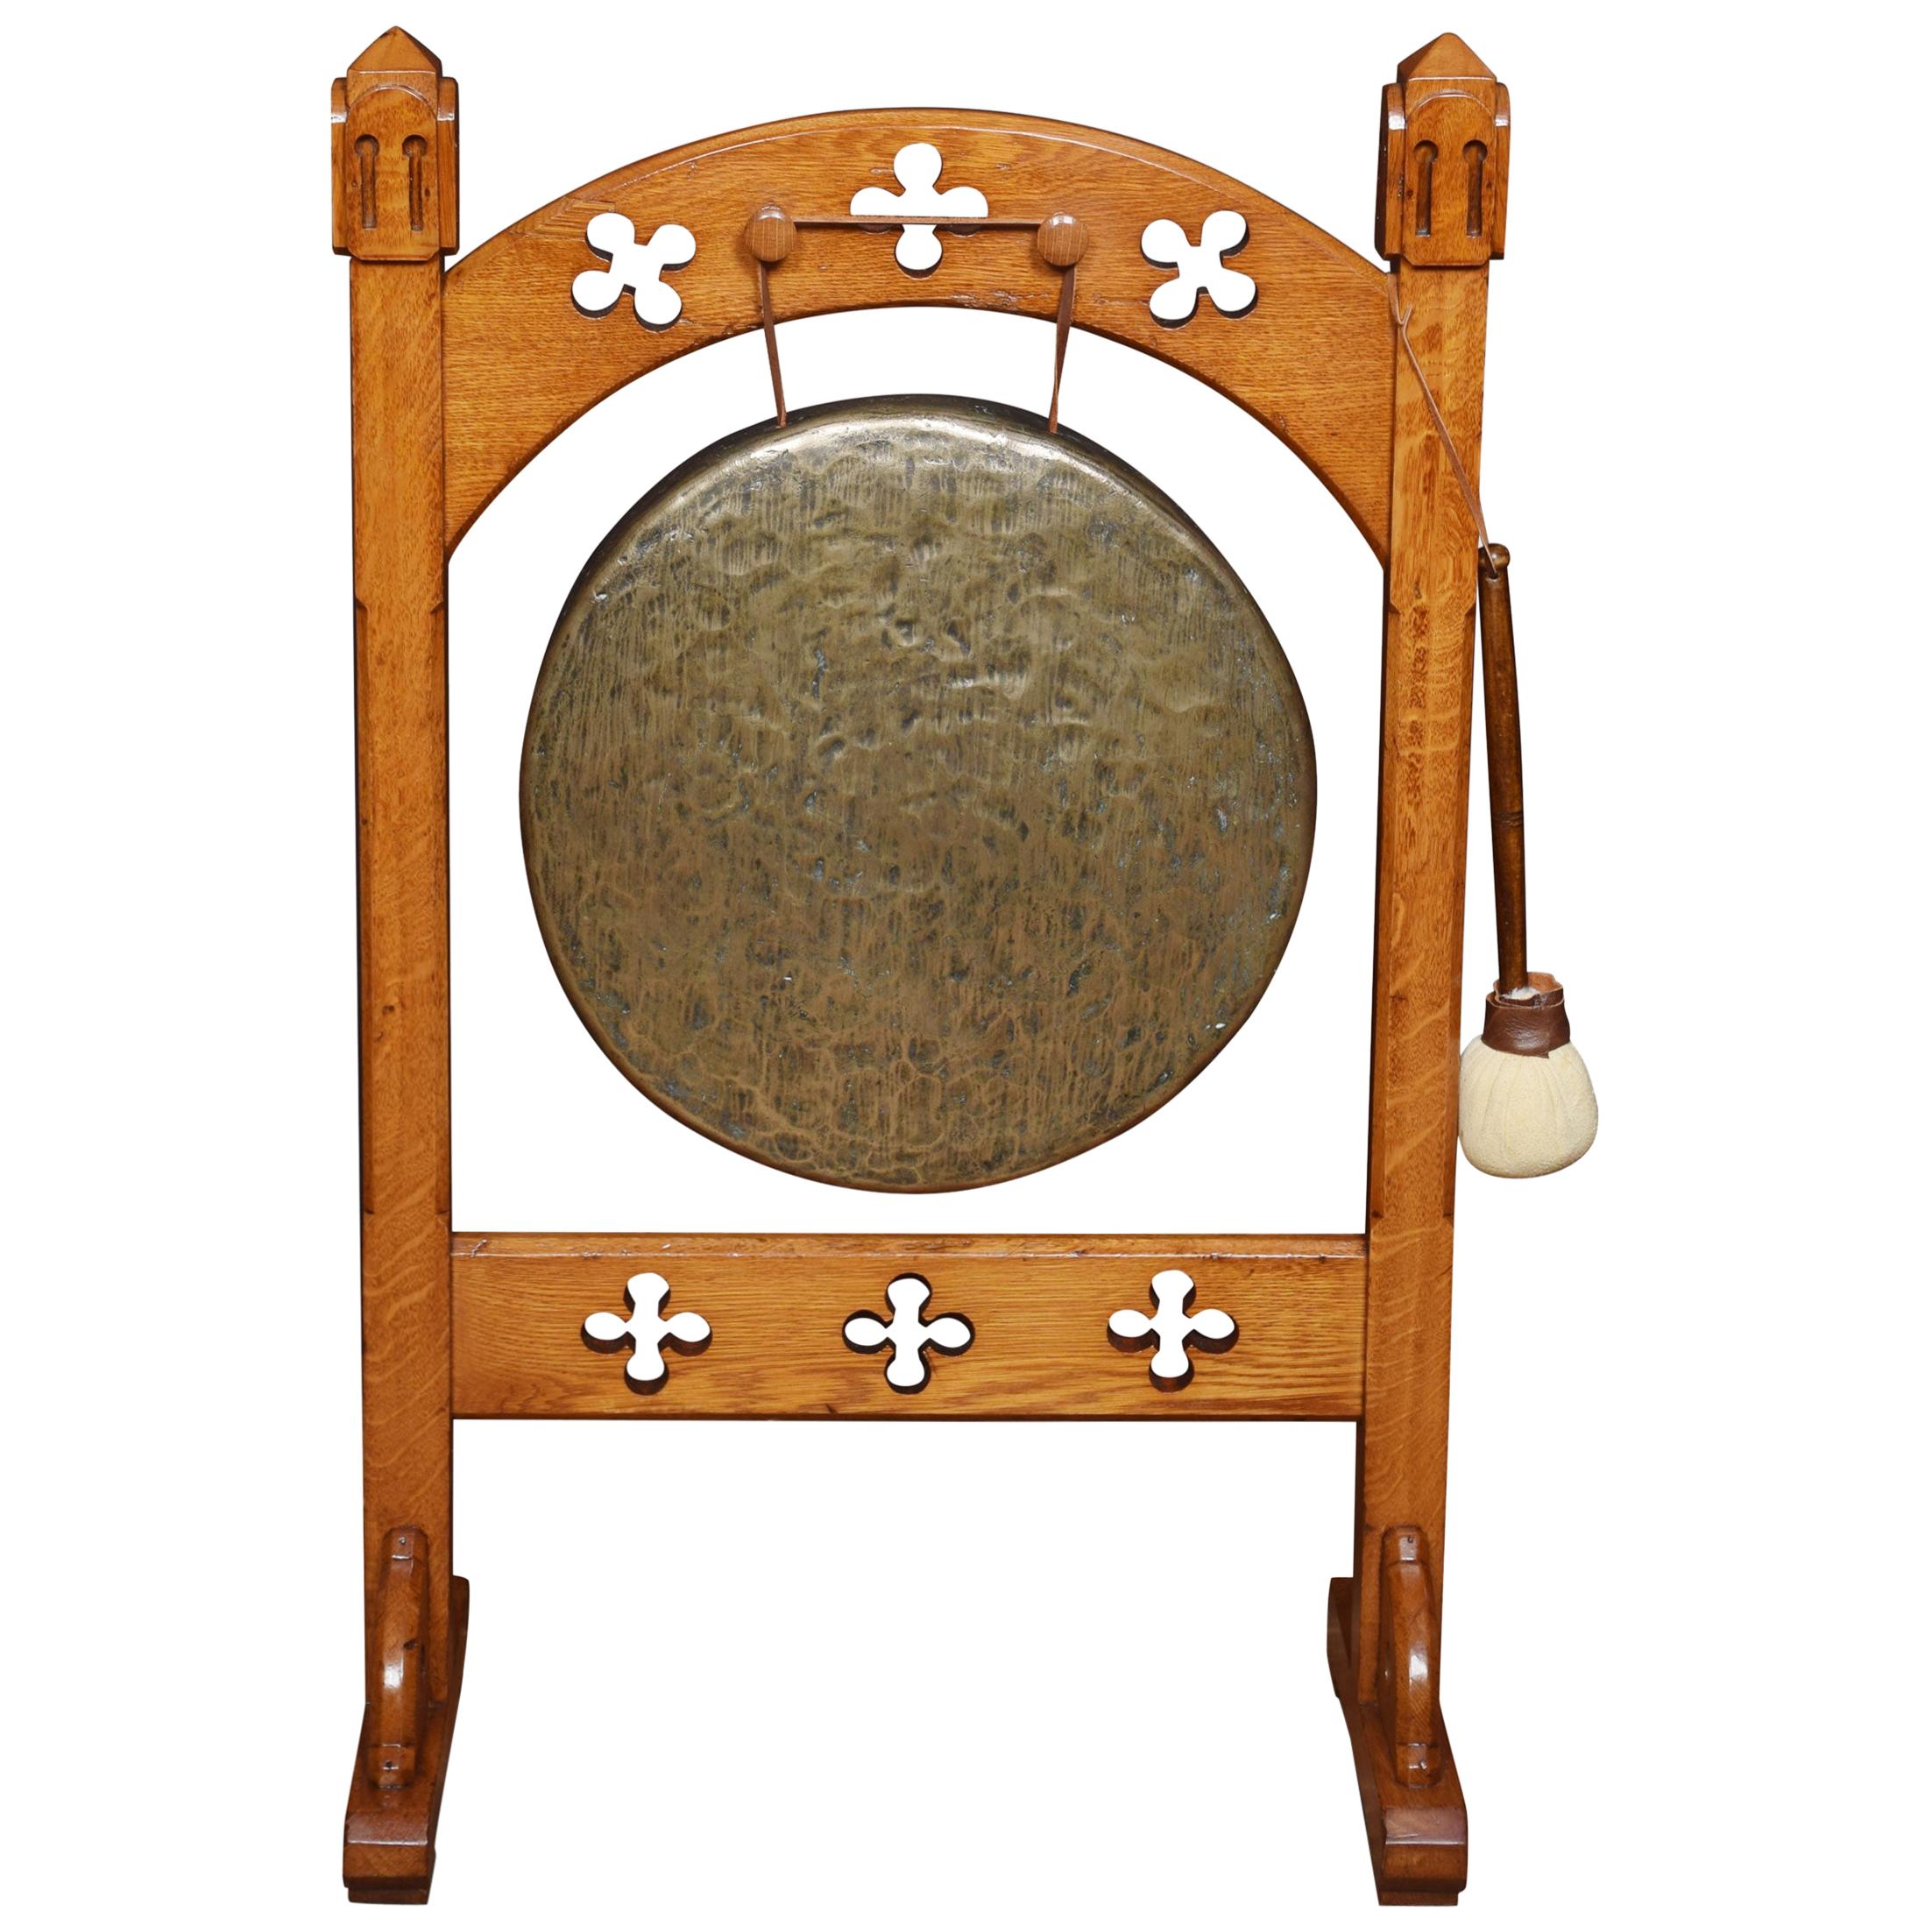 Is a gong made out of brass?